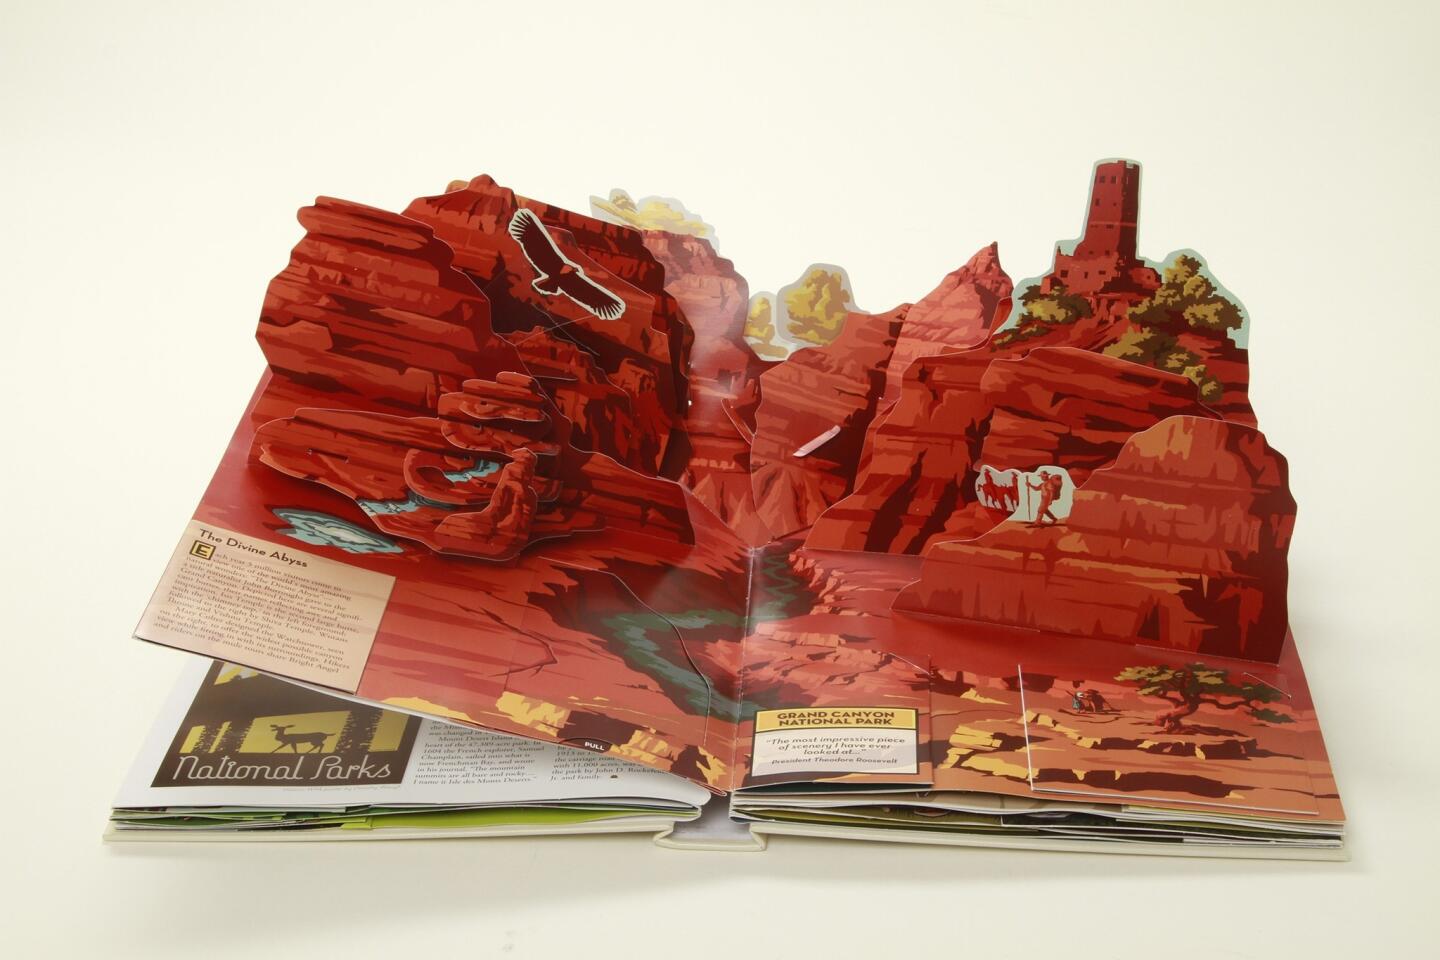 "America's National Parks -- A Pop-Up Book"